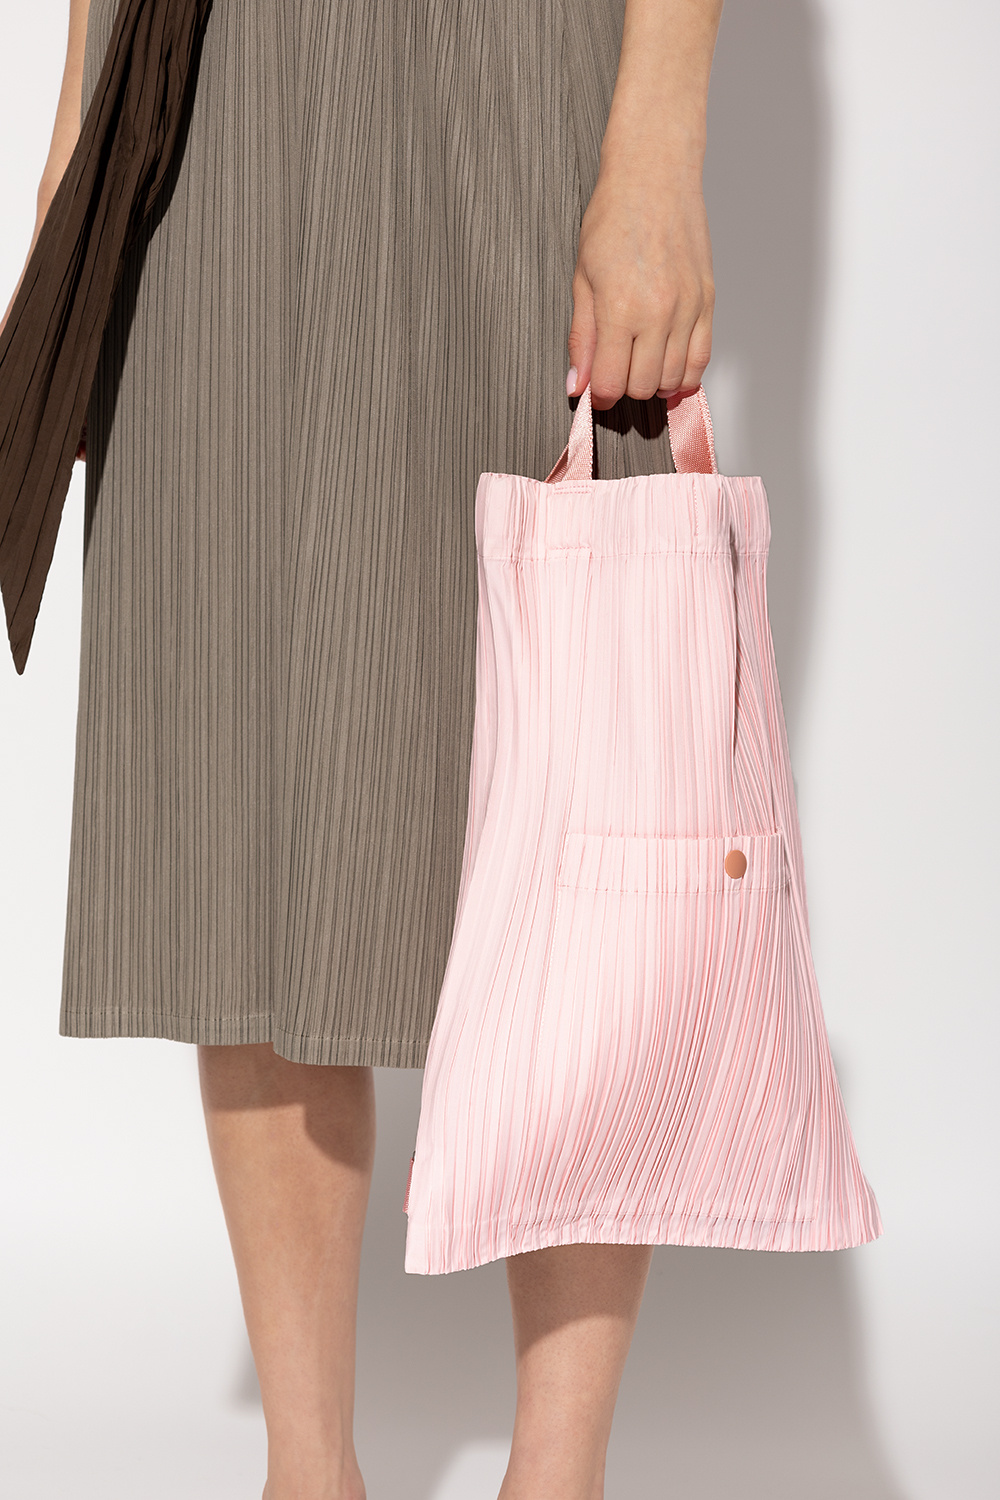 Issey Miyake Pleats Please Pleated Cup backpack